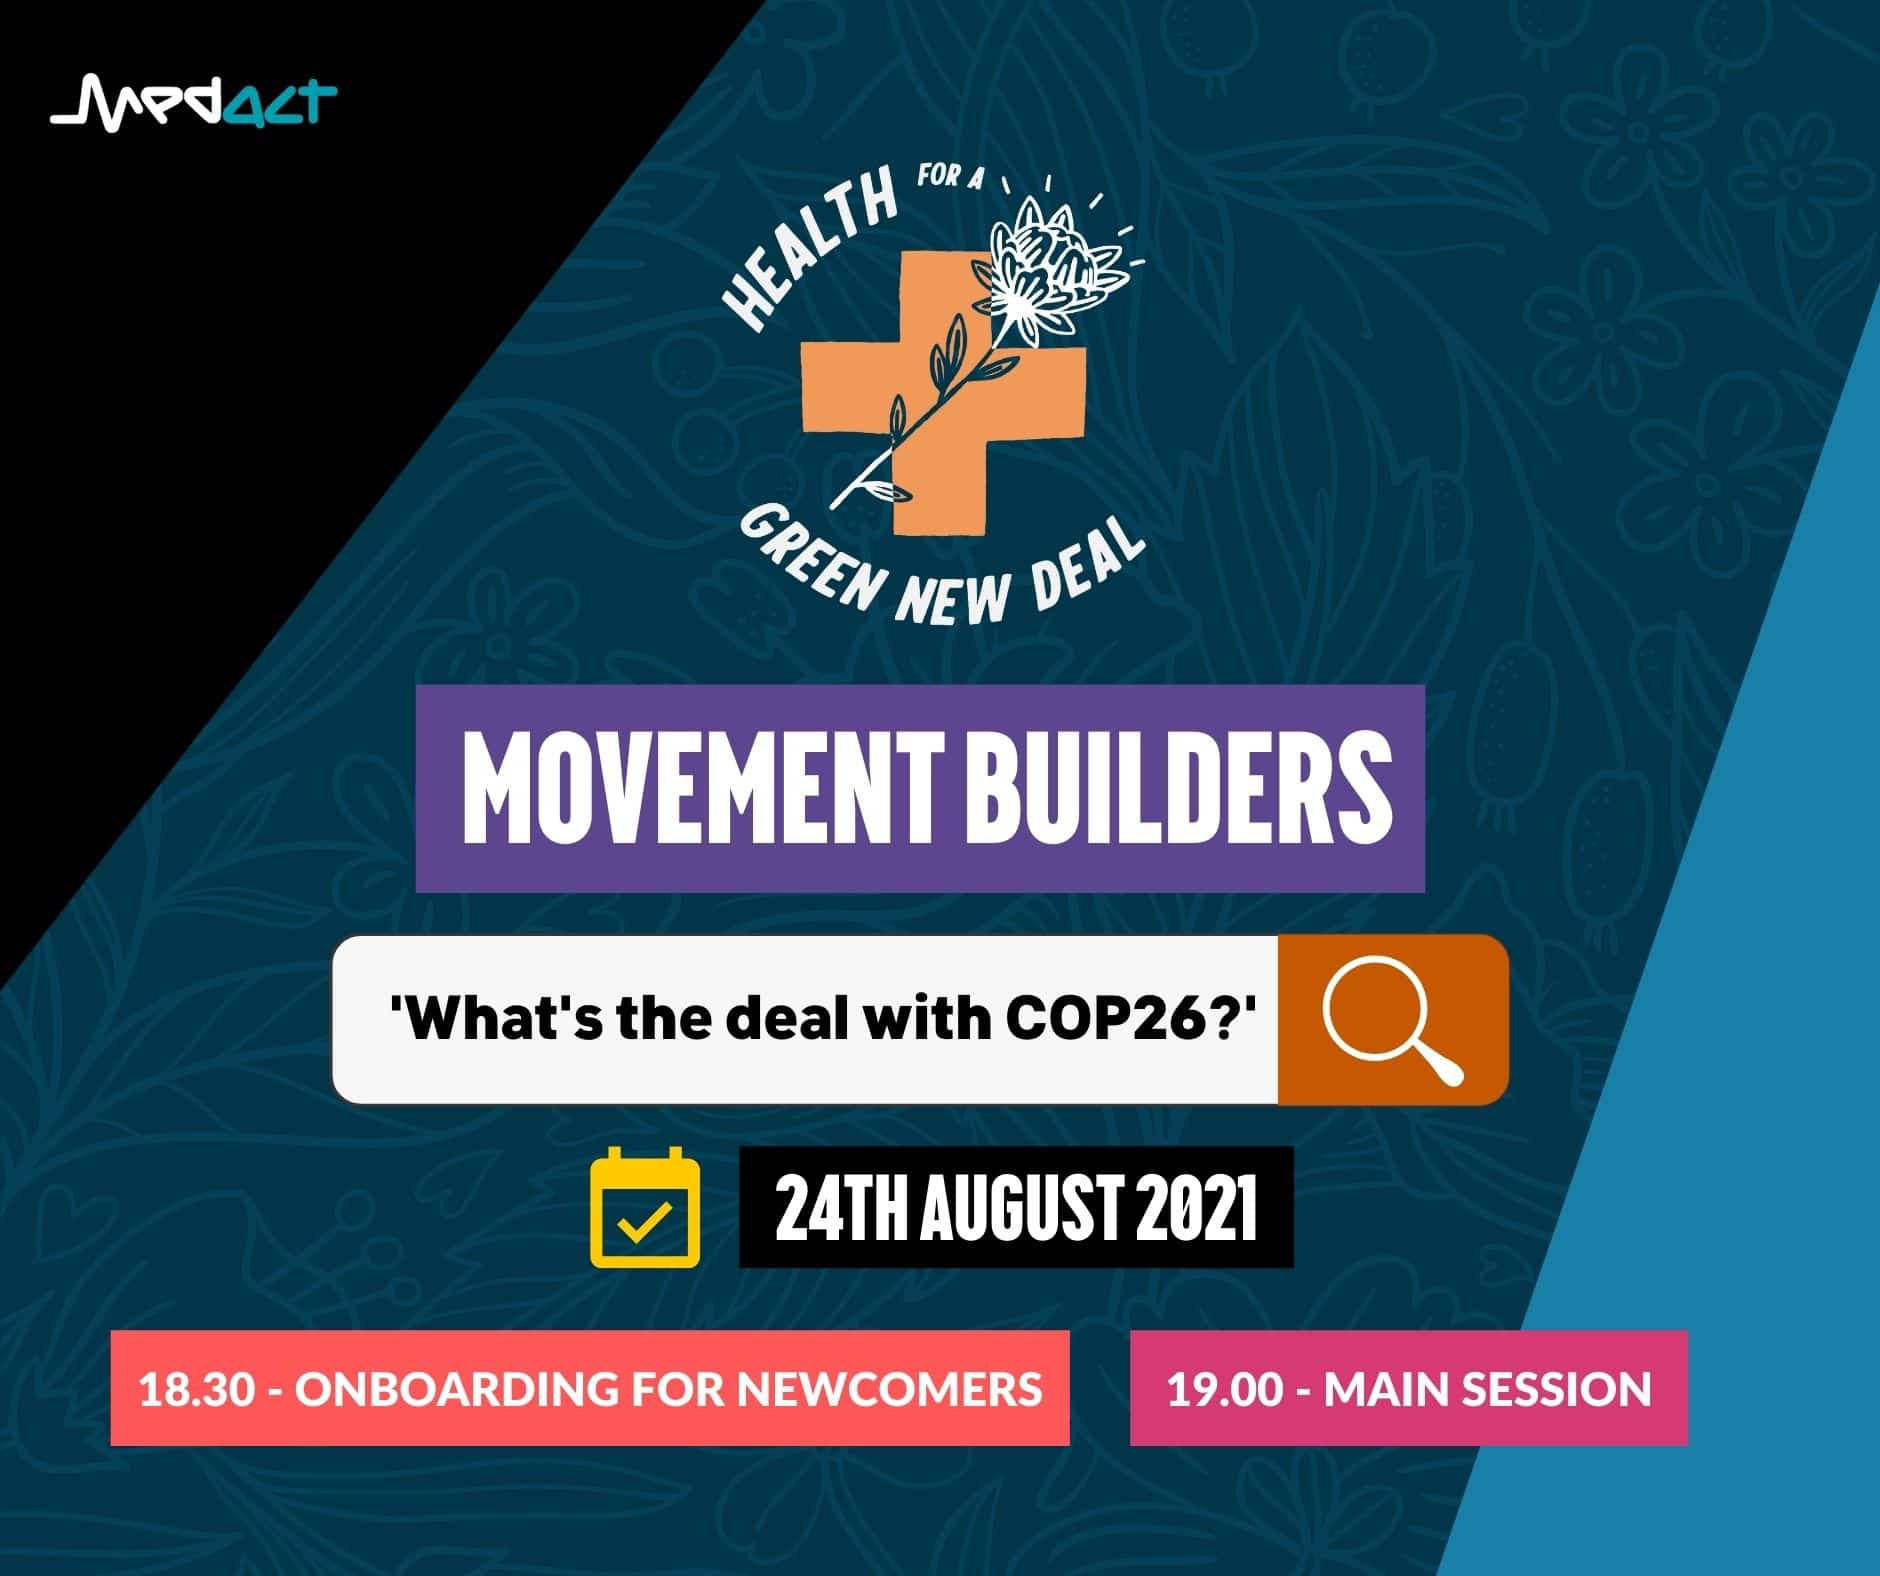 Health for a Green New Deal MOVEMENT BUILDERS - What's the deal with COP26 - 24th AUgust 2021 - 6.30pm onboarding for newcomers, 7pm main session